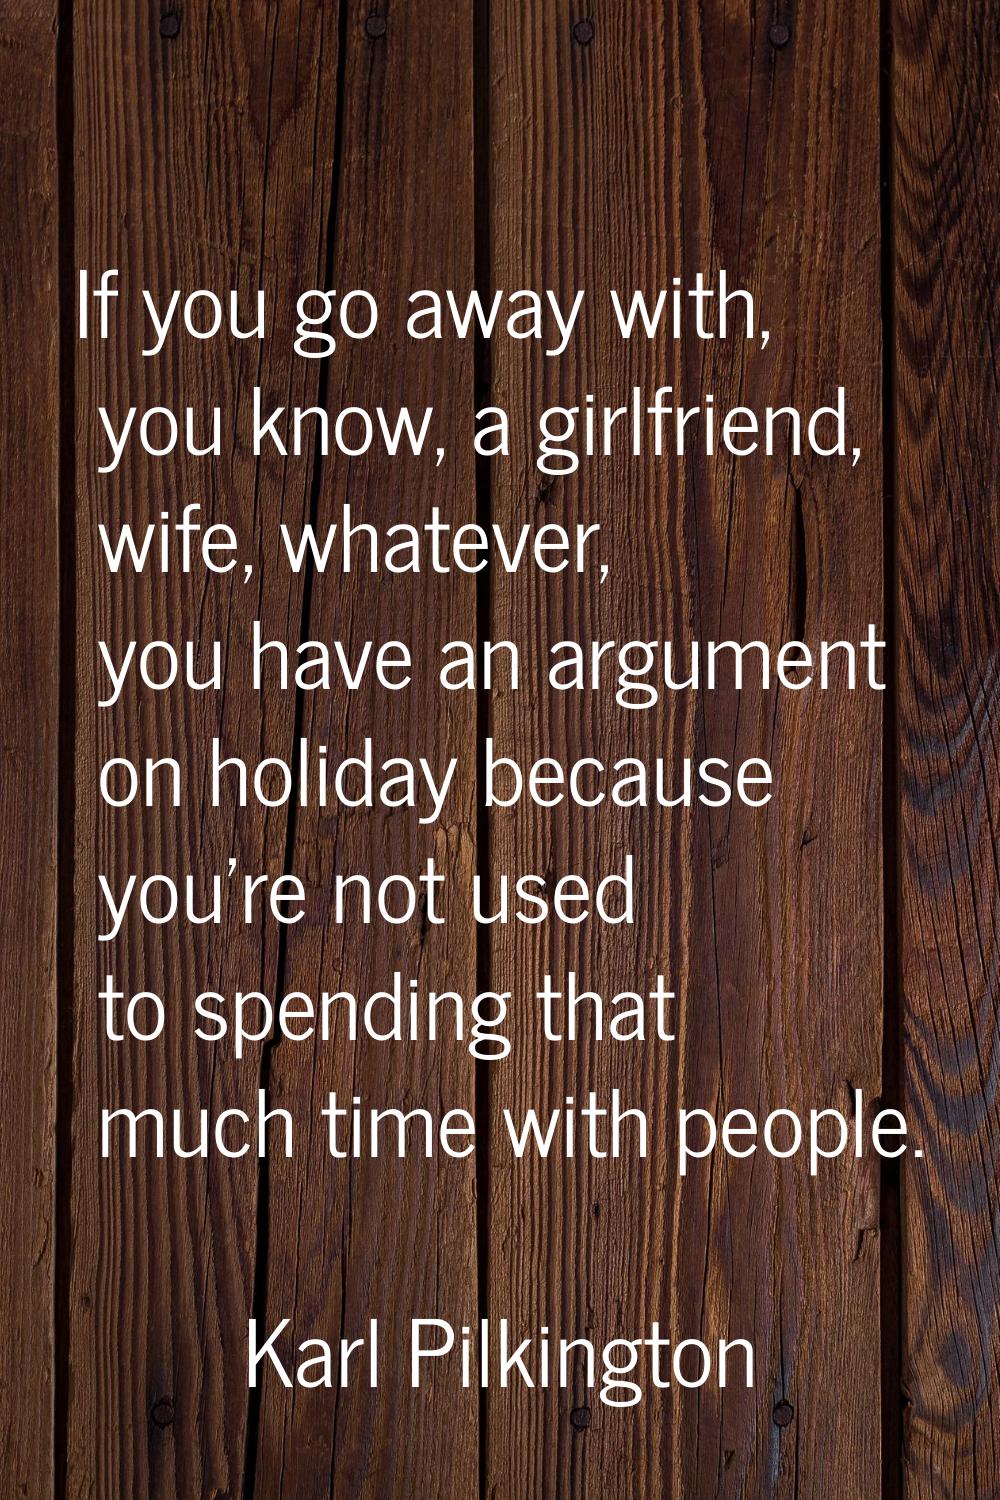 If you go away with, you know, a girlfriend, wife, whatever, you have an argument on holiday becaus